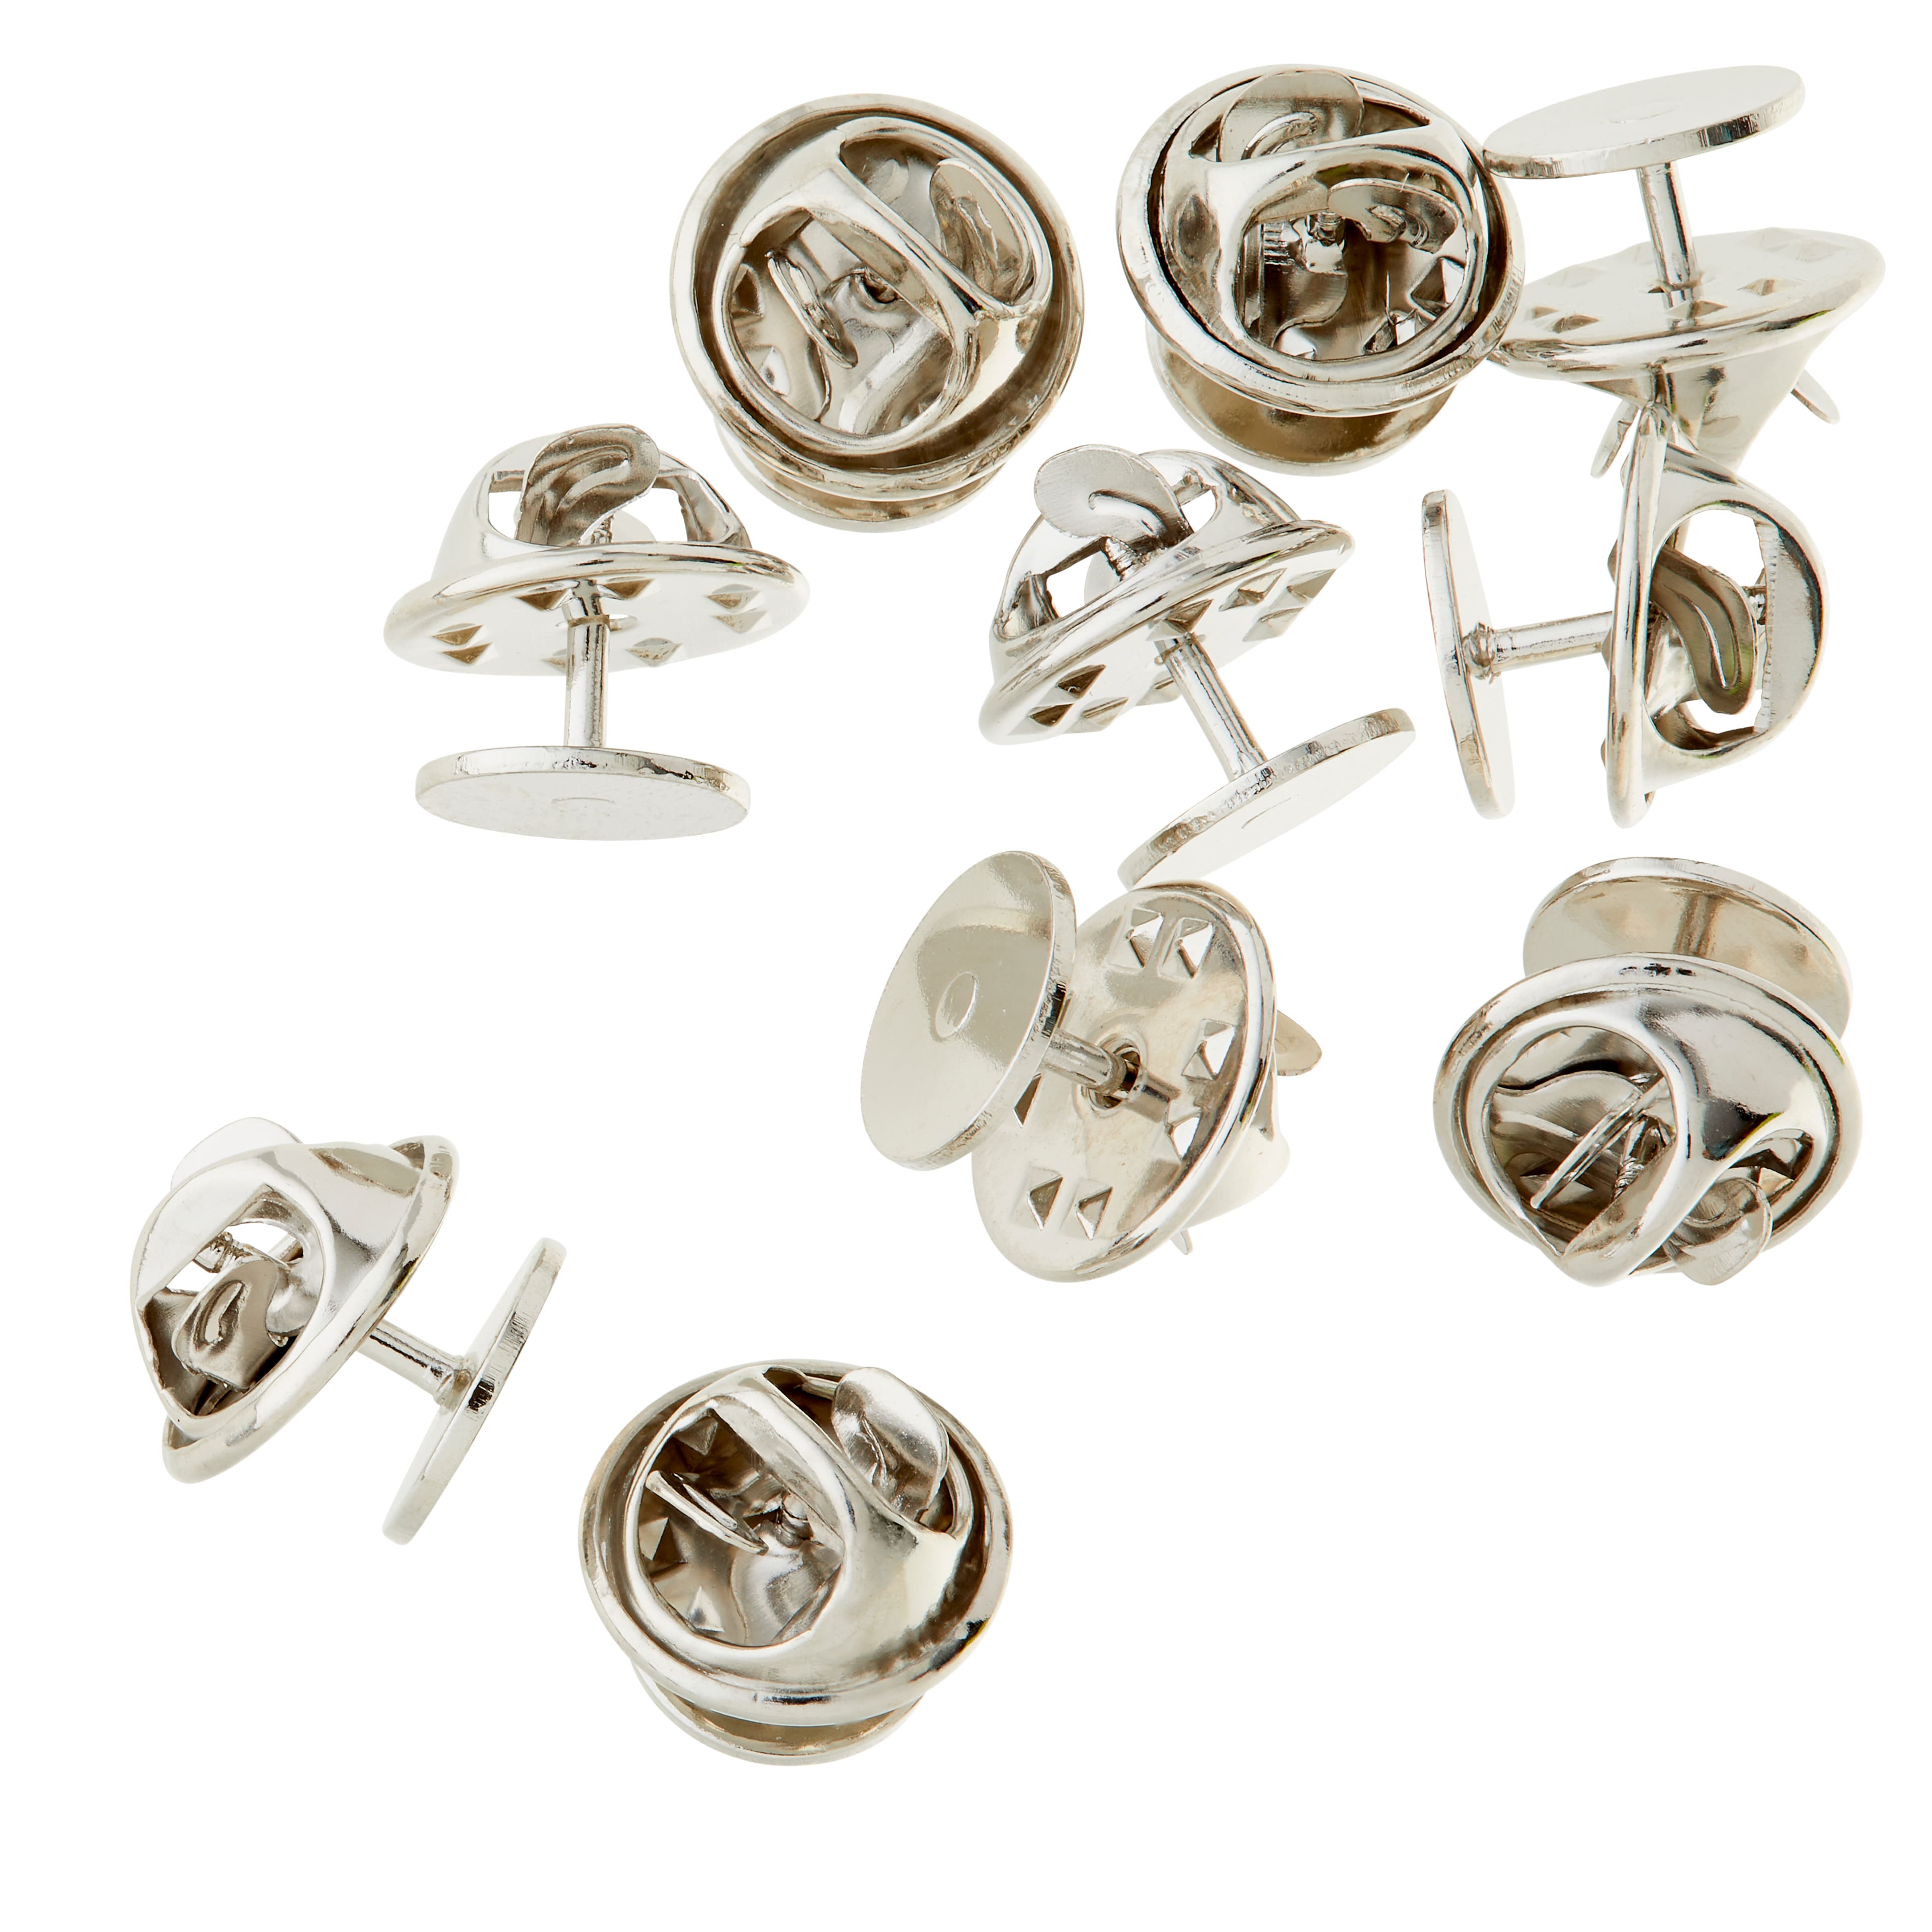 Adhesive Pin Backs Stainless Steel Corsage Channel And Brooch Diamond Pin  Corsage Lapel Pin Set Vintage